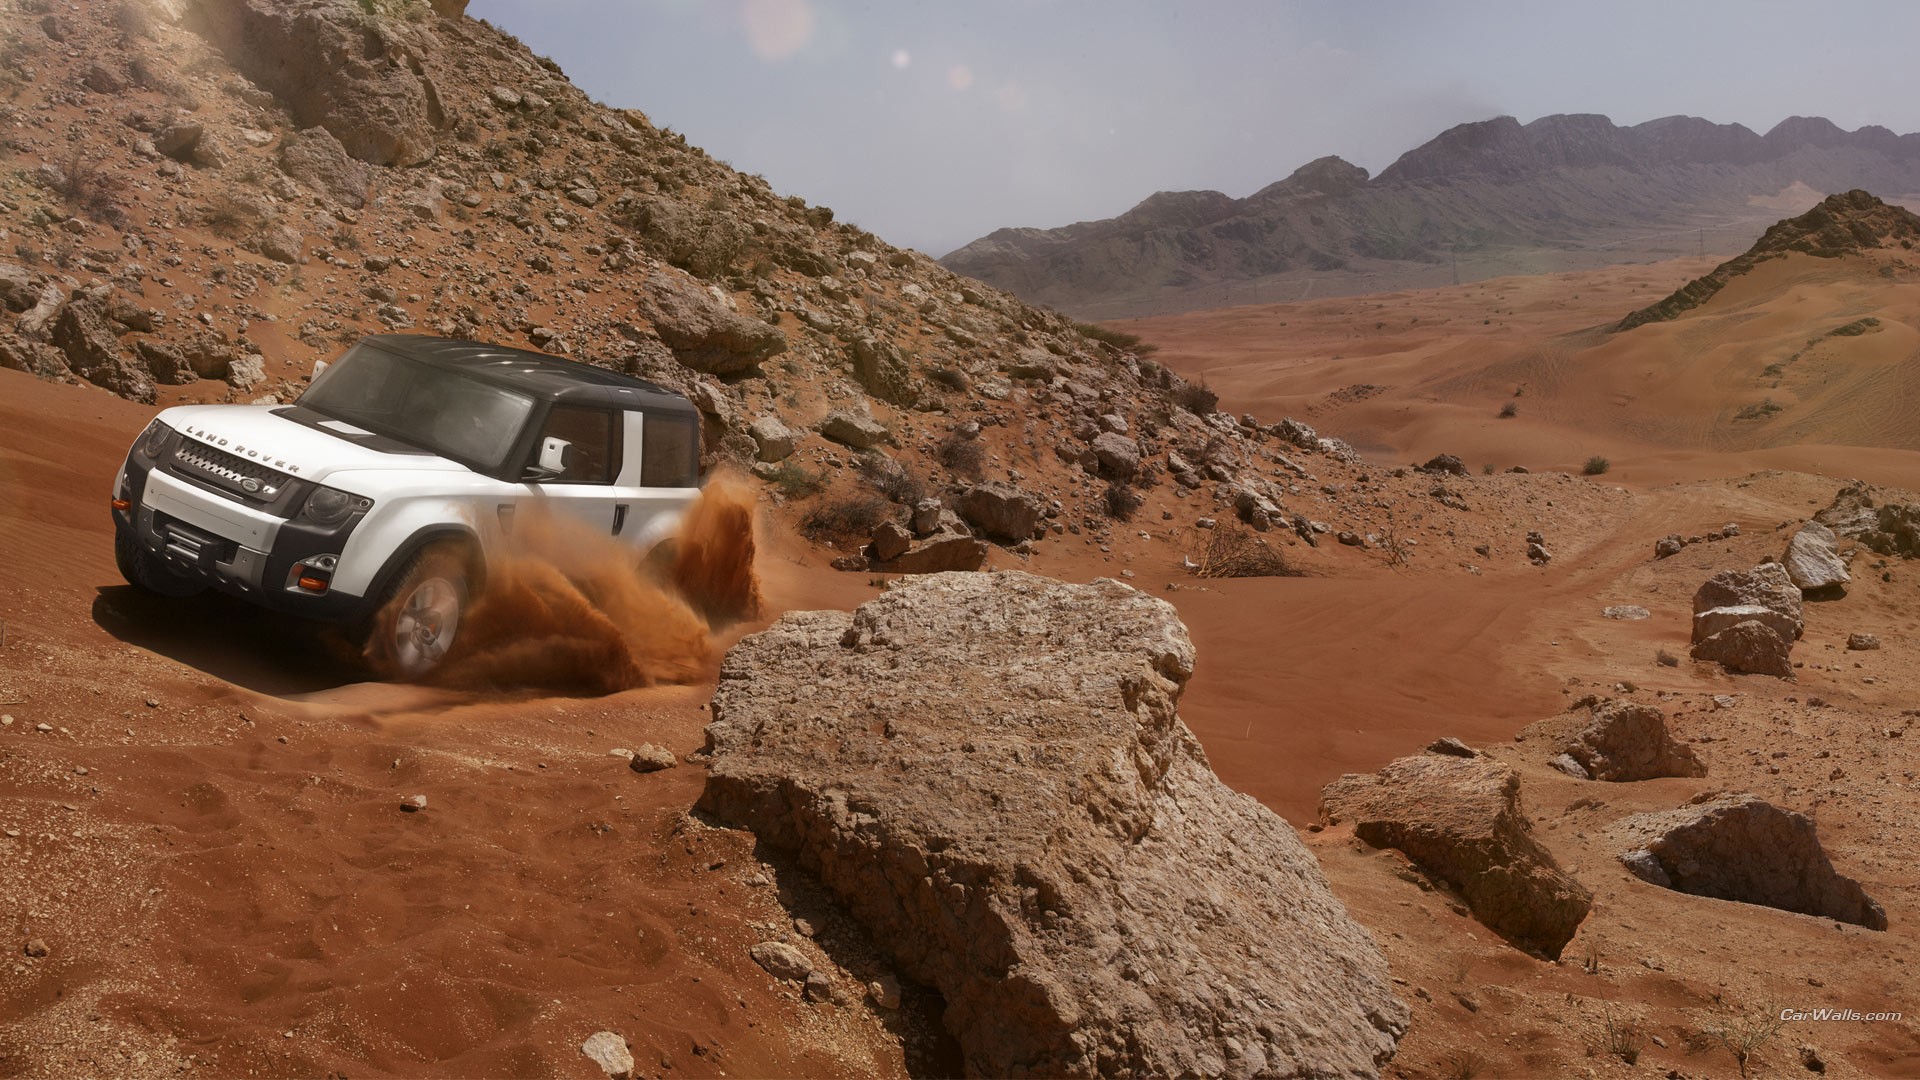 General 1920x1080 Land Rover DC100 concept cars desert rocks vehicle outdoors white cars Land Rover British cars SUV